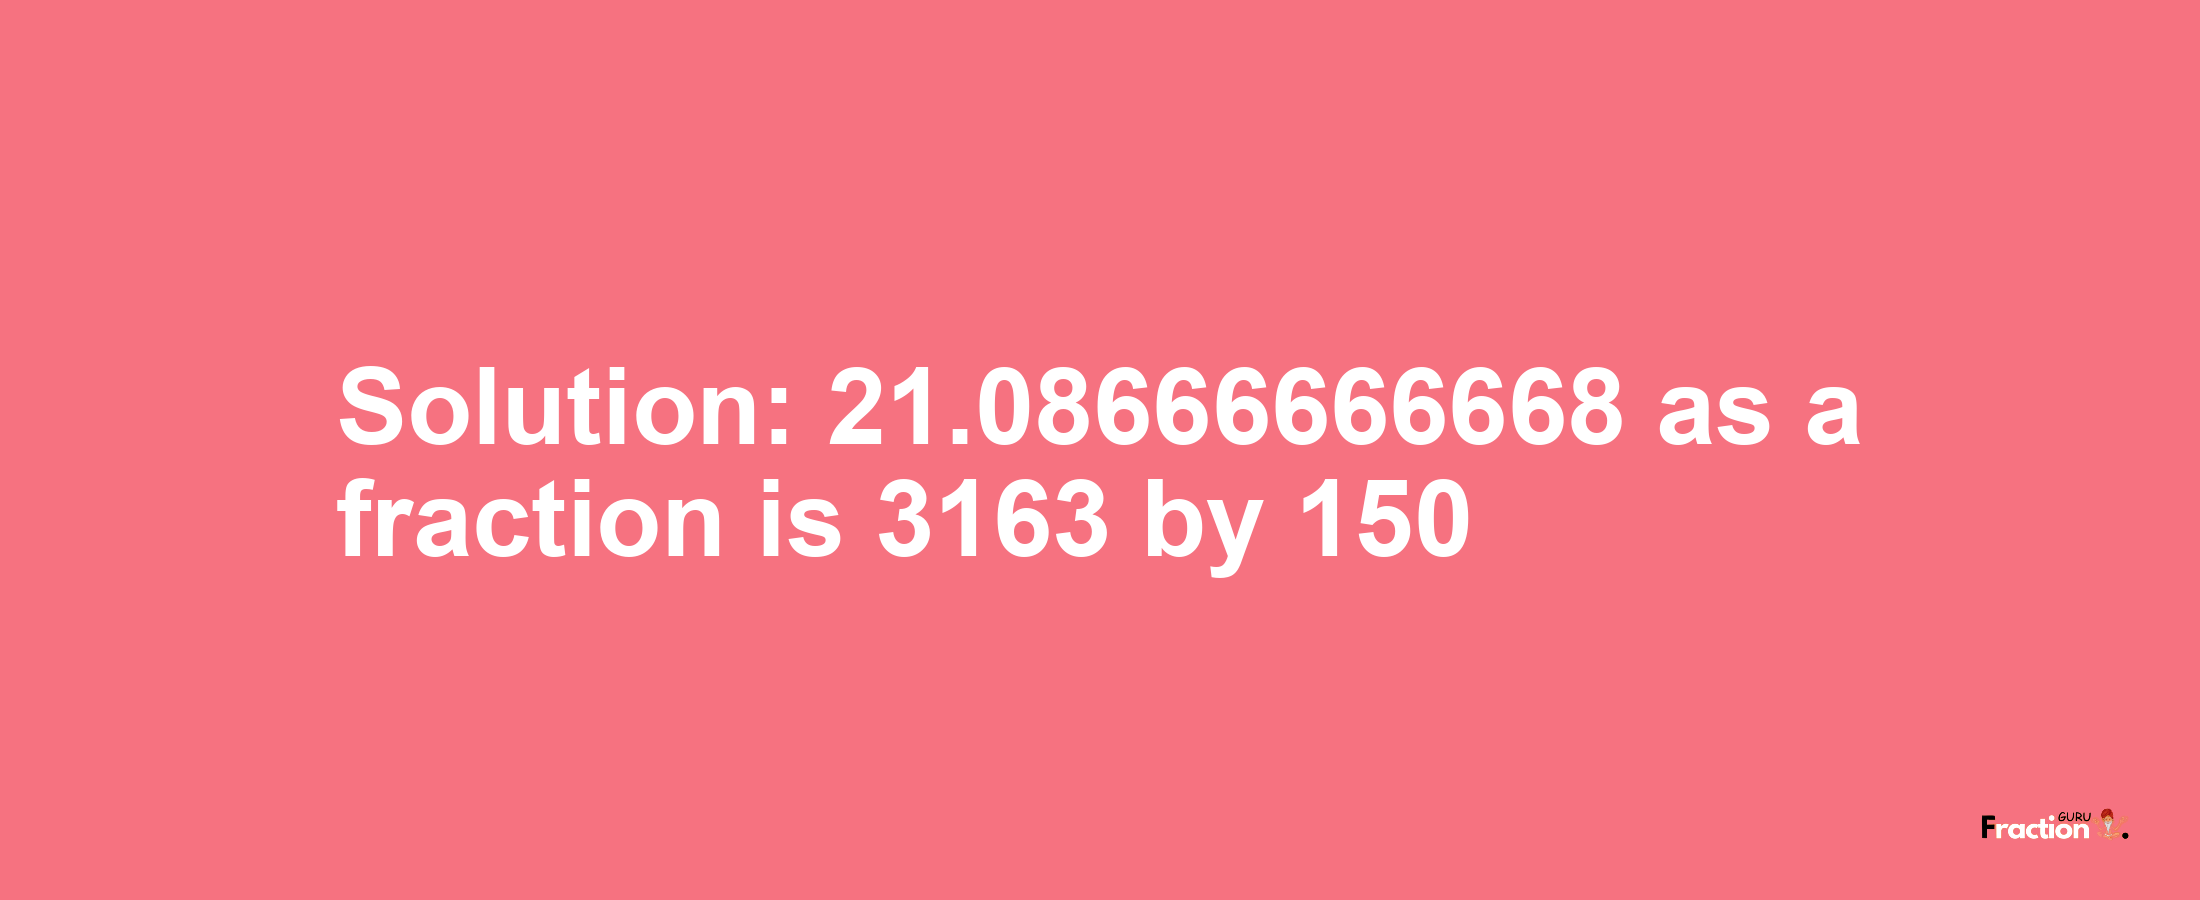 Solution:21.08666666668 as a fraction is 3163/150